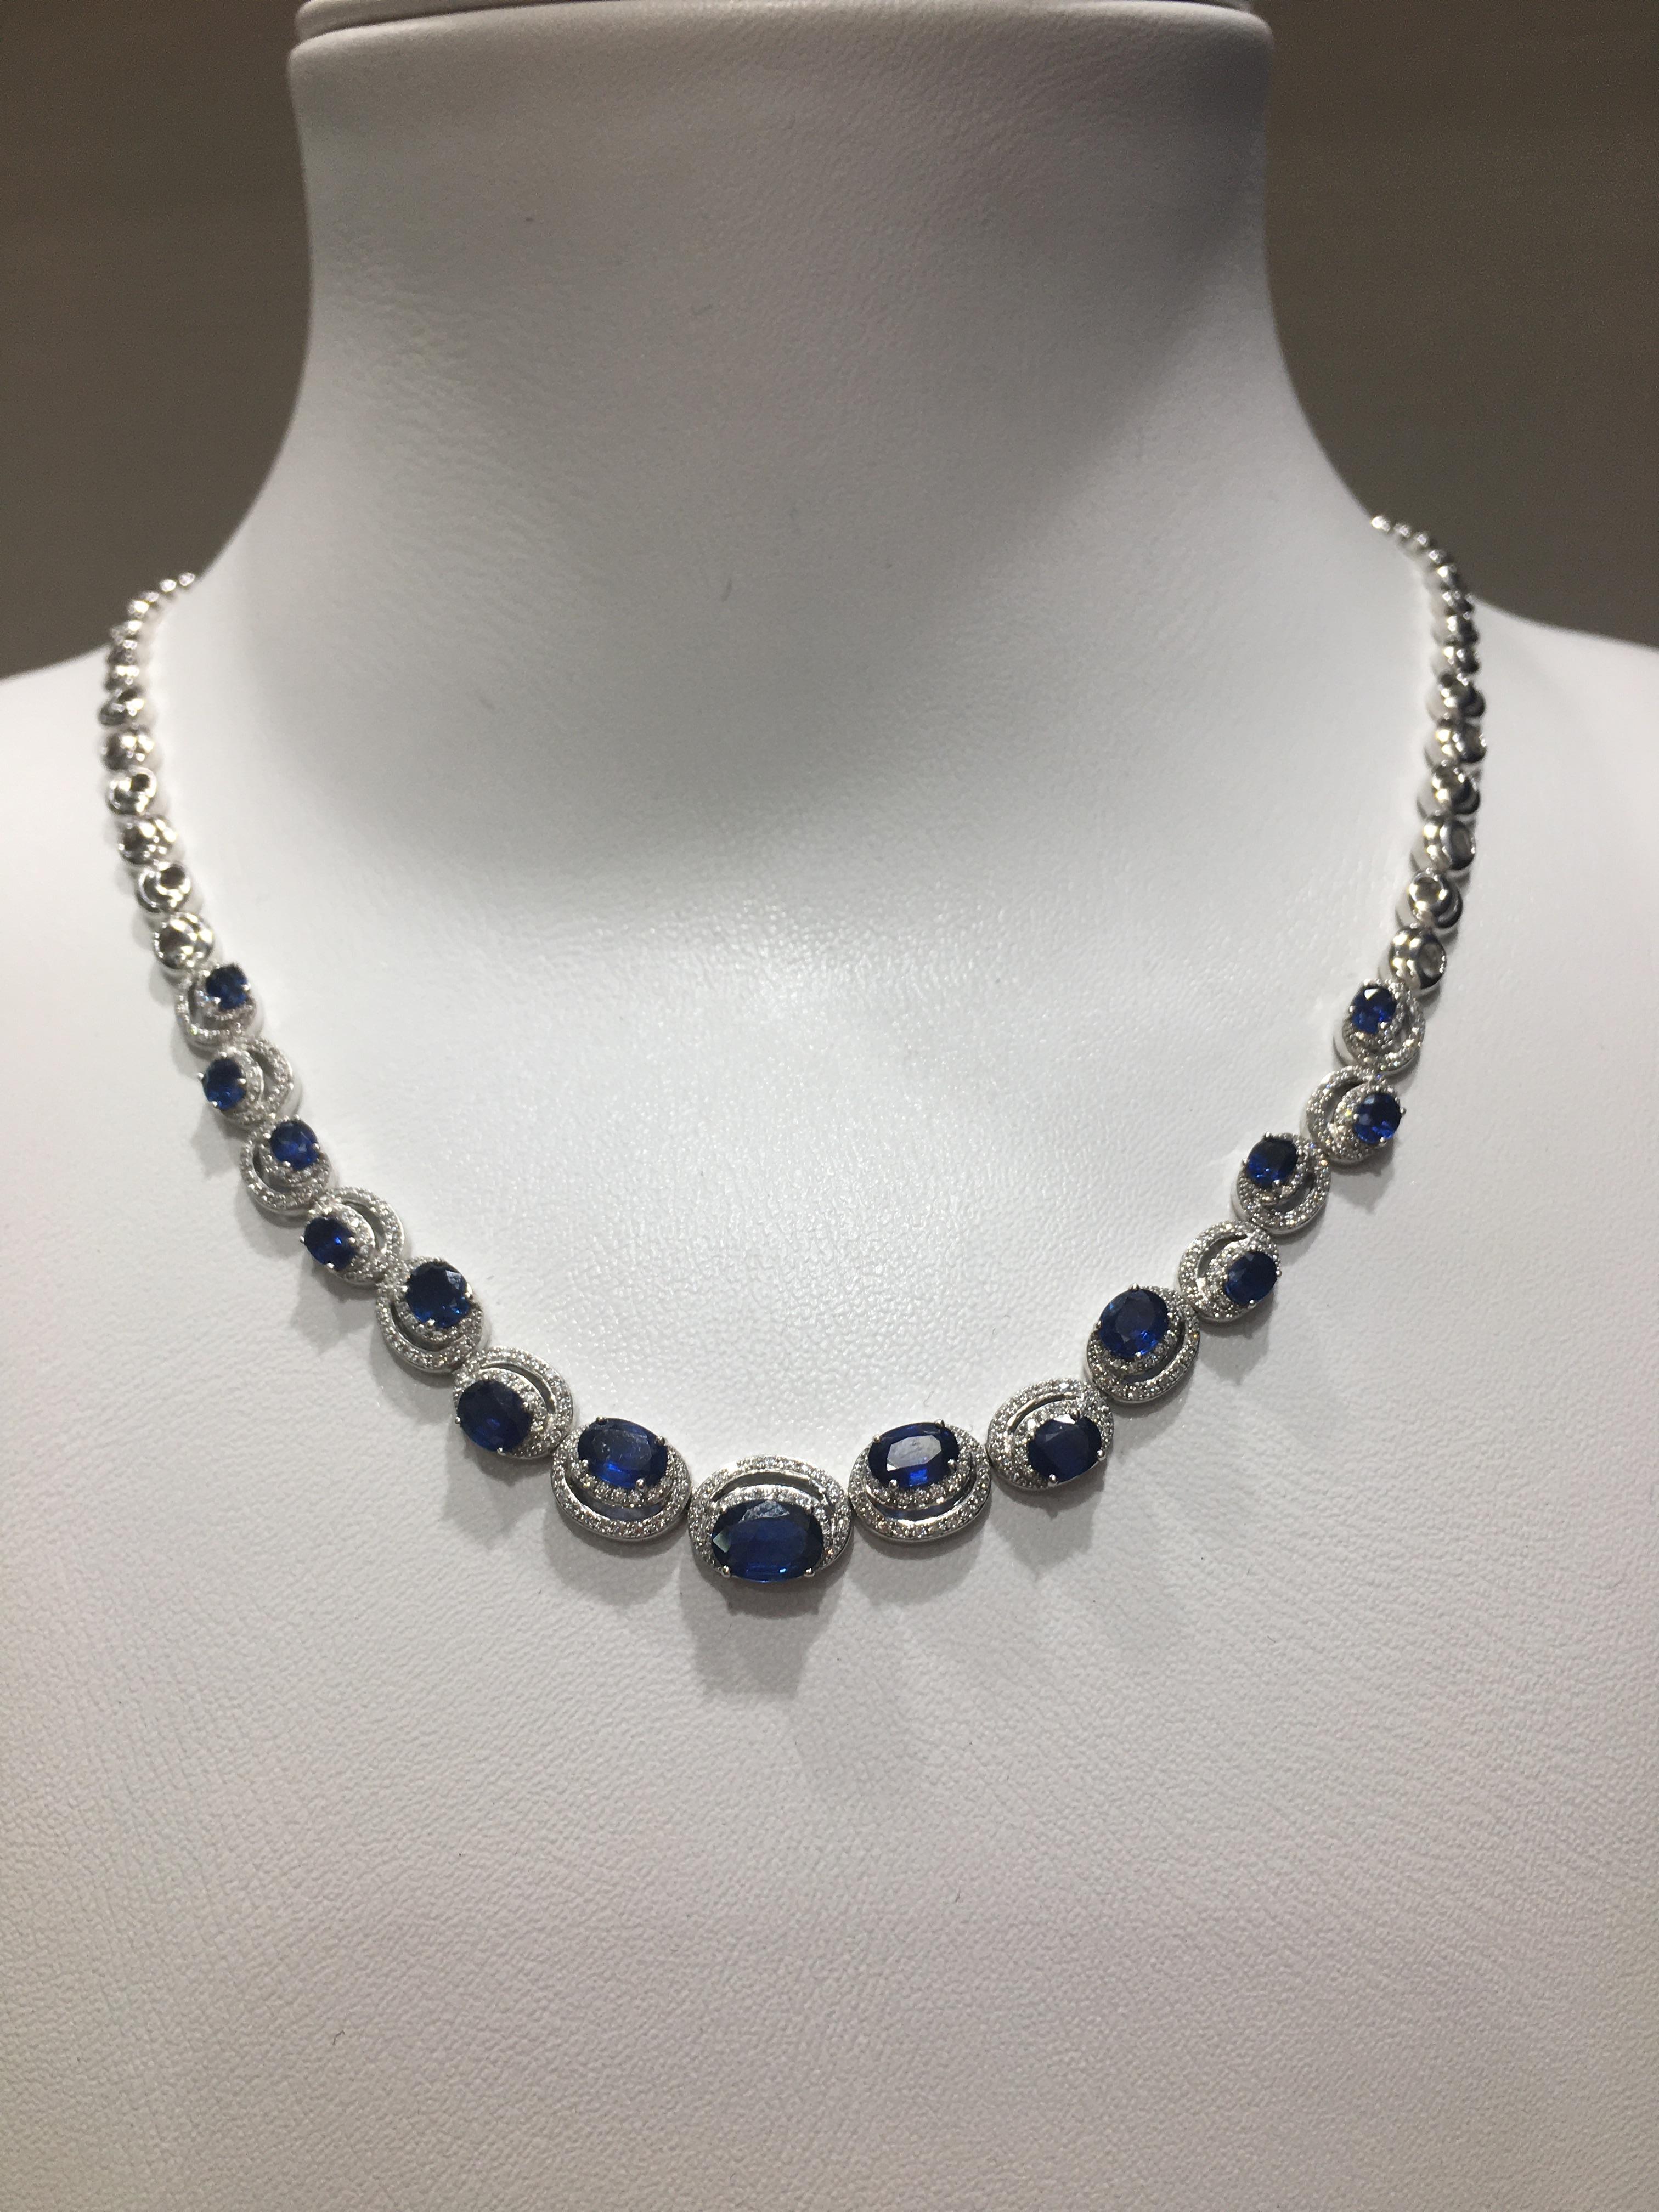 White Gold 14K Necklace 
Weight 21.37 gram
Length 42 cm 
Diamond 320-Round 57-0,89-4/5A
Blue Sapphire 15--5,12 Т(4)/2A

With a heritage of ancient fine Swiss jewelry traditions, NATKINA is a Geneva based jewellery brand, which creates modern